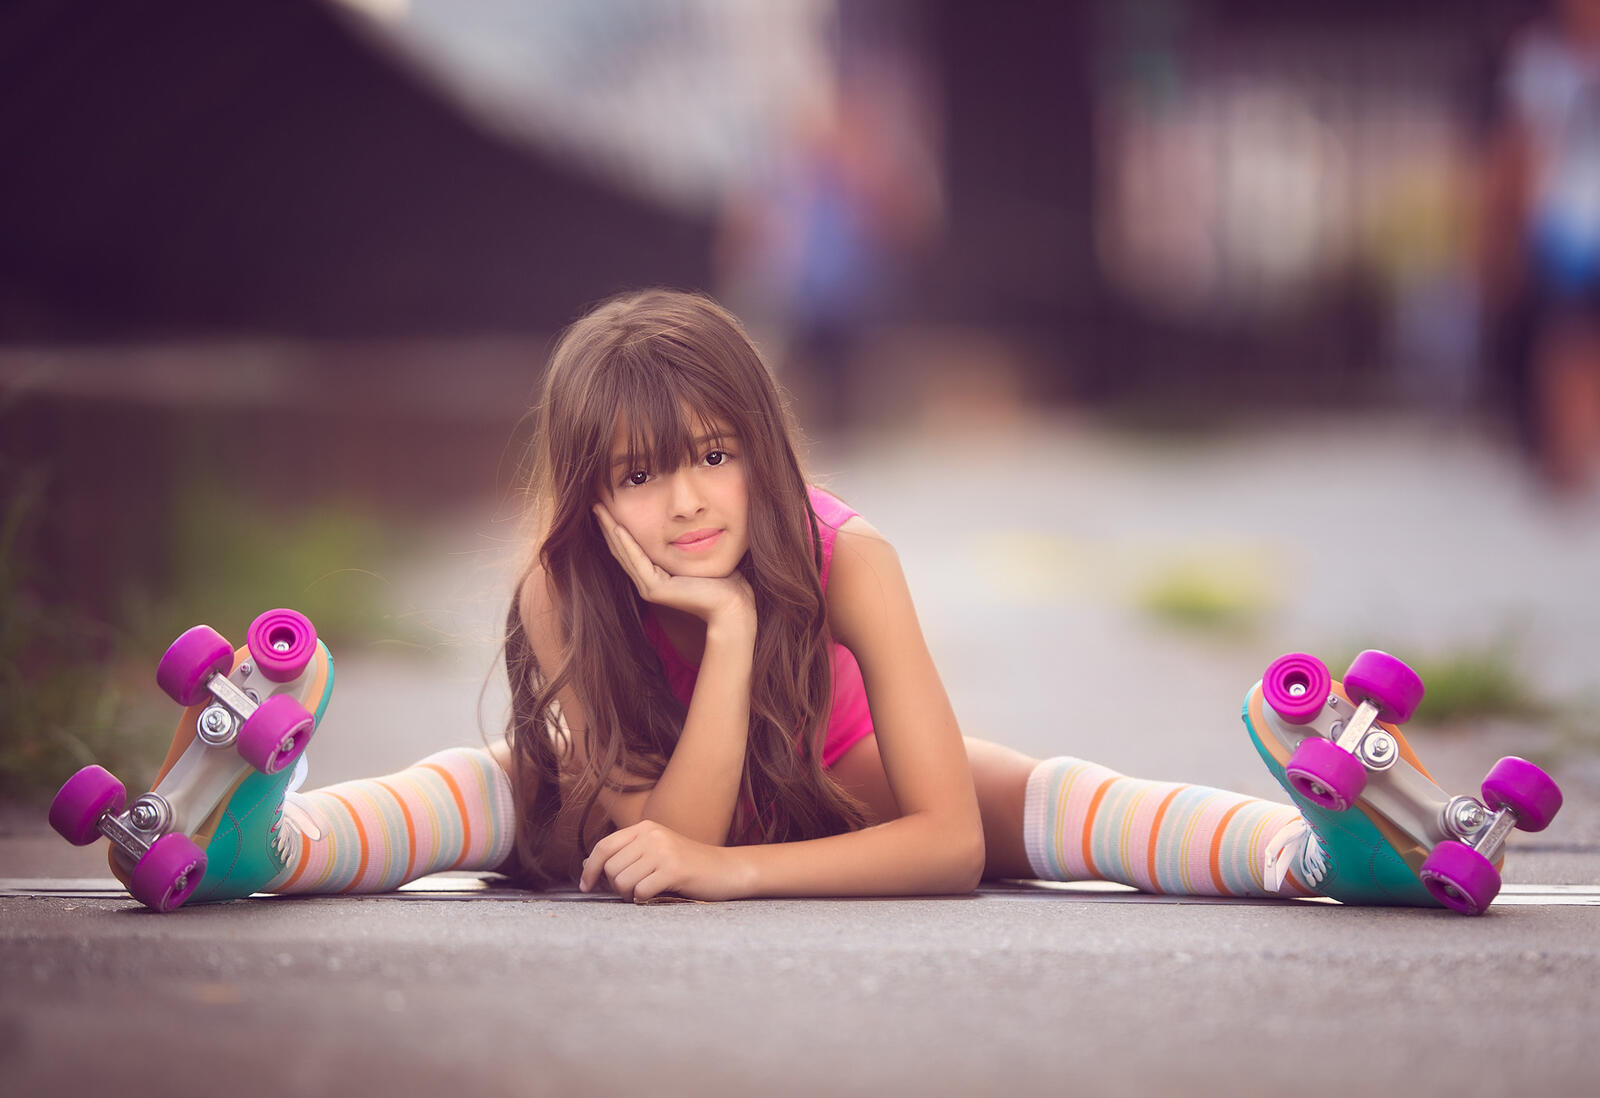 Free photo Cute girl sitting on the pavement on roller skates